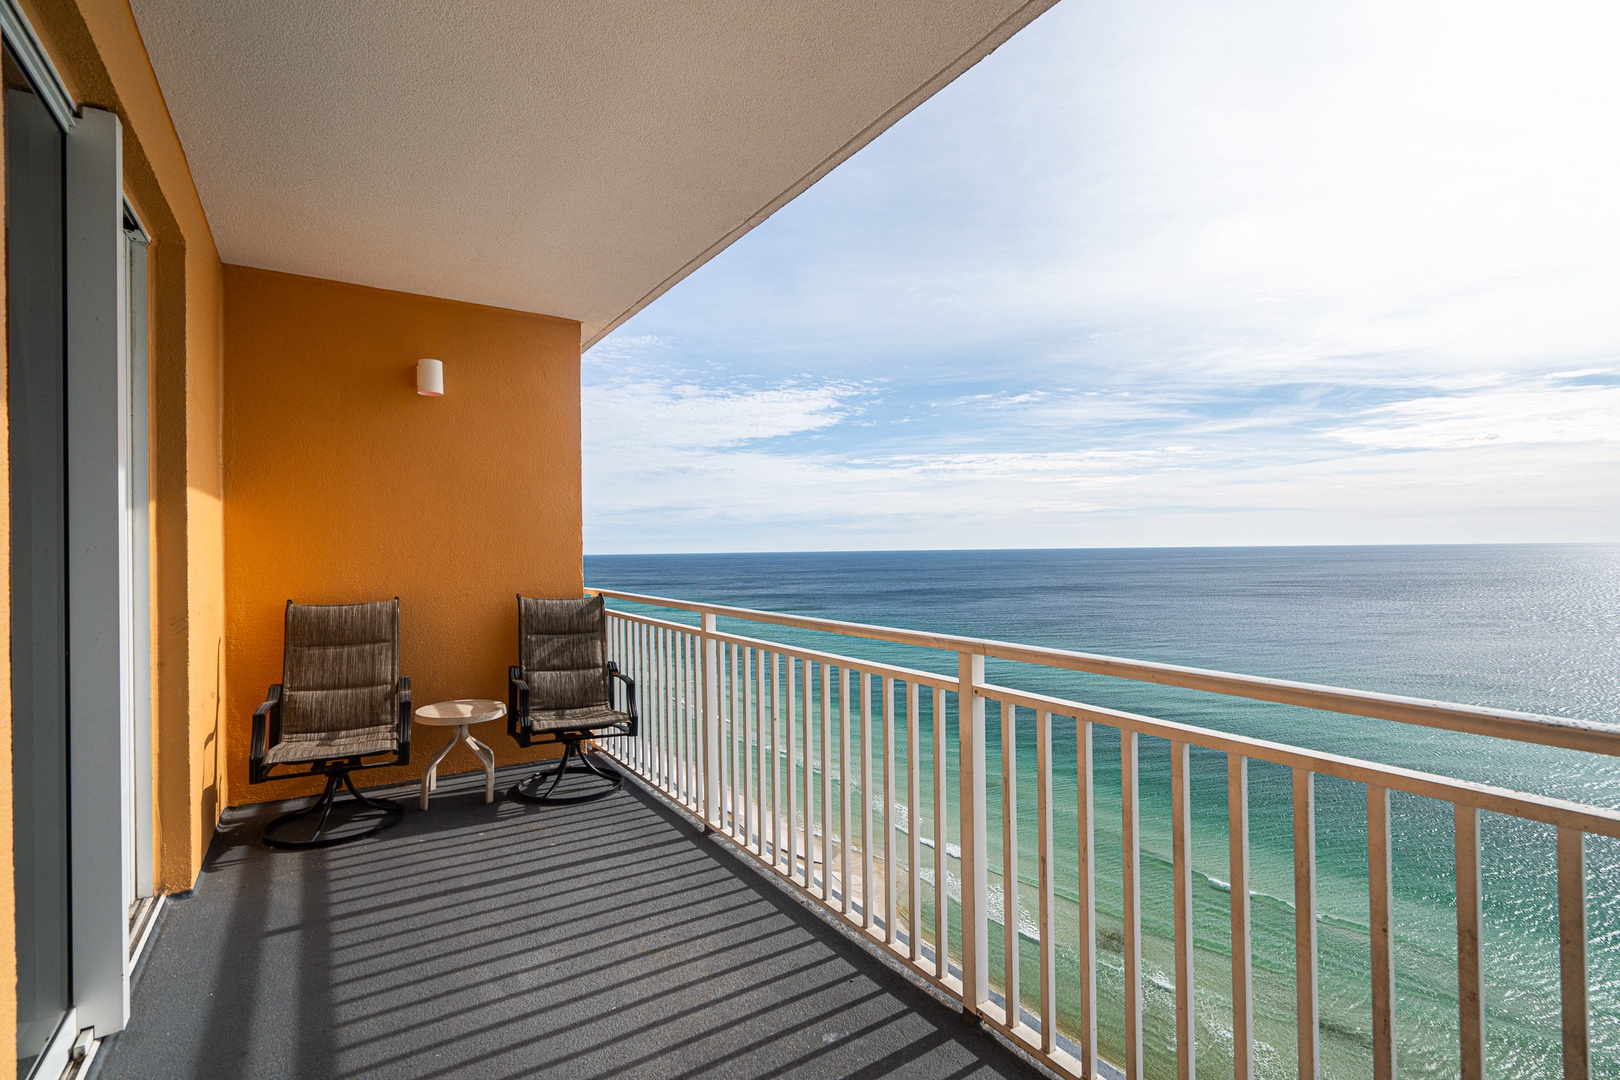 Step out onto the private balcony & lounge with stunning ocean views